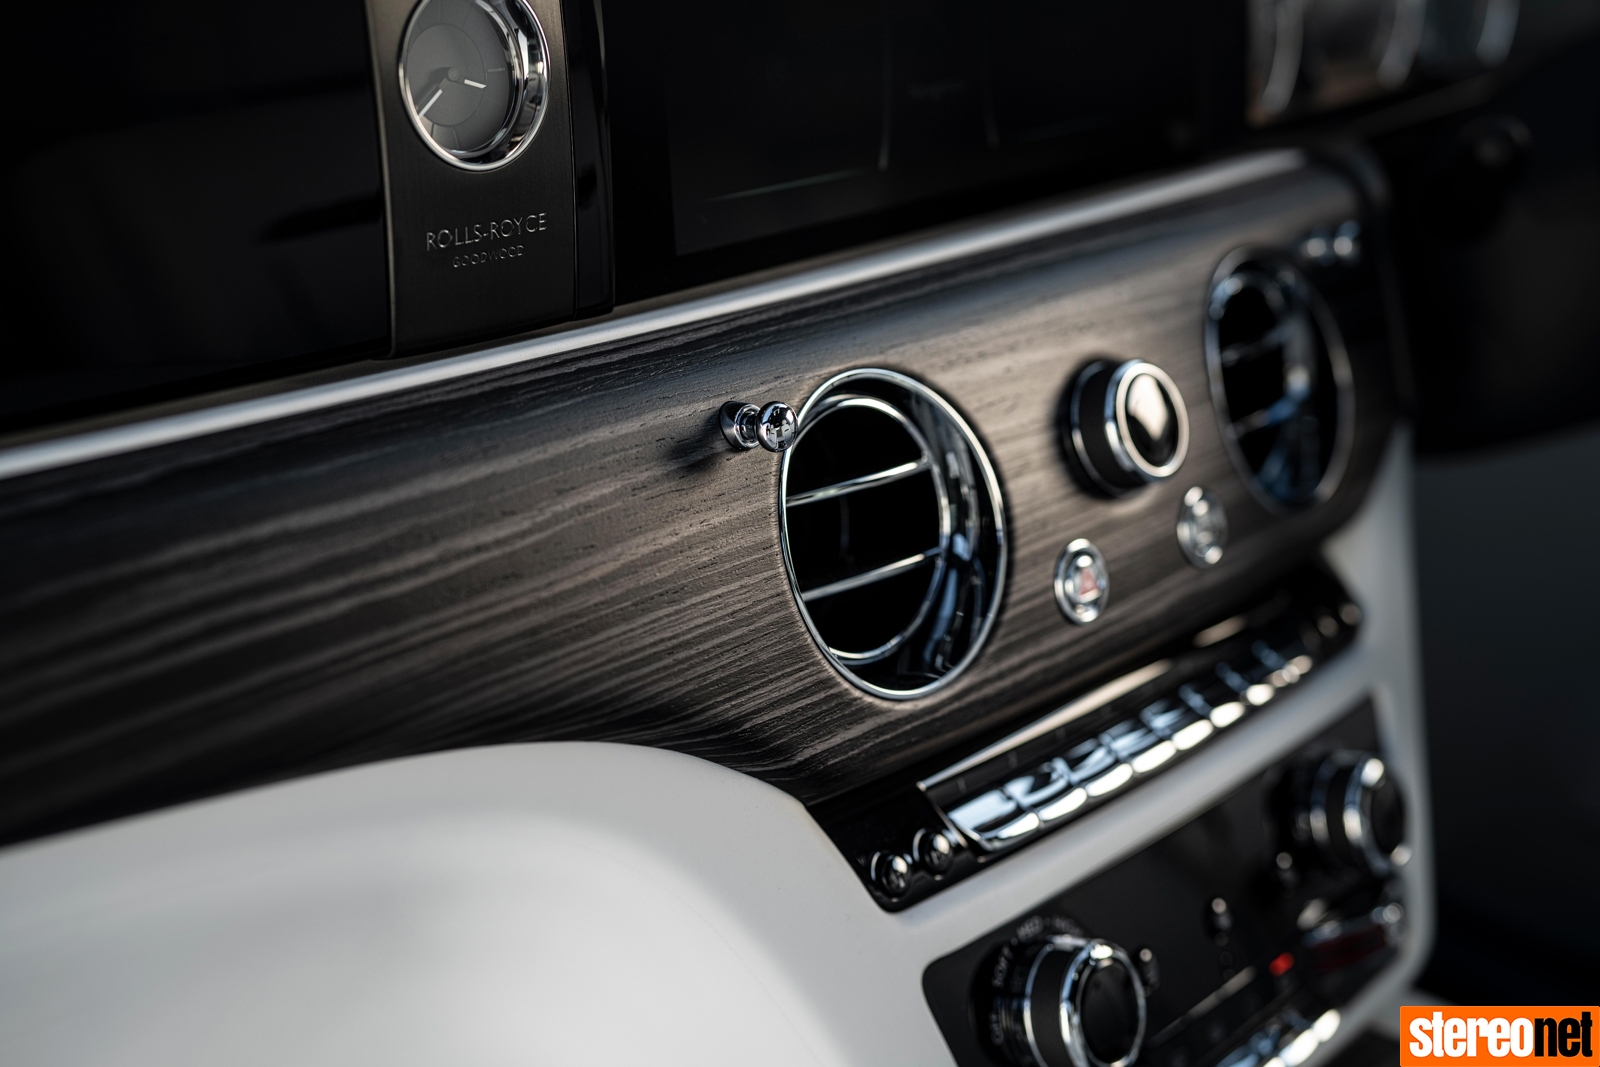 The RollsRoyce Inspired by Music Wraith Turns Up the Volume with an 18 Speaker Sound System  Architectural Digest